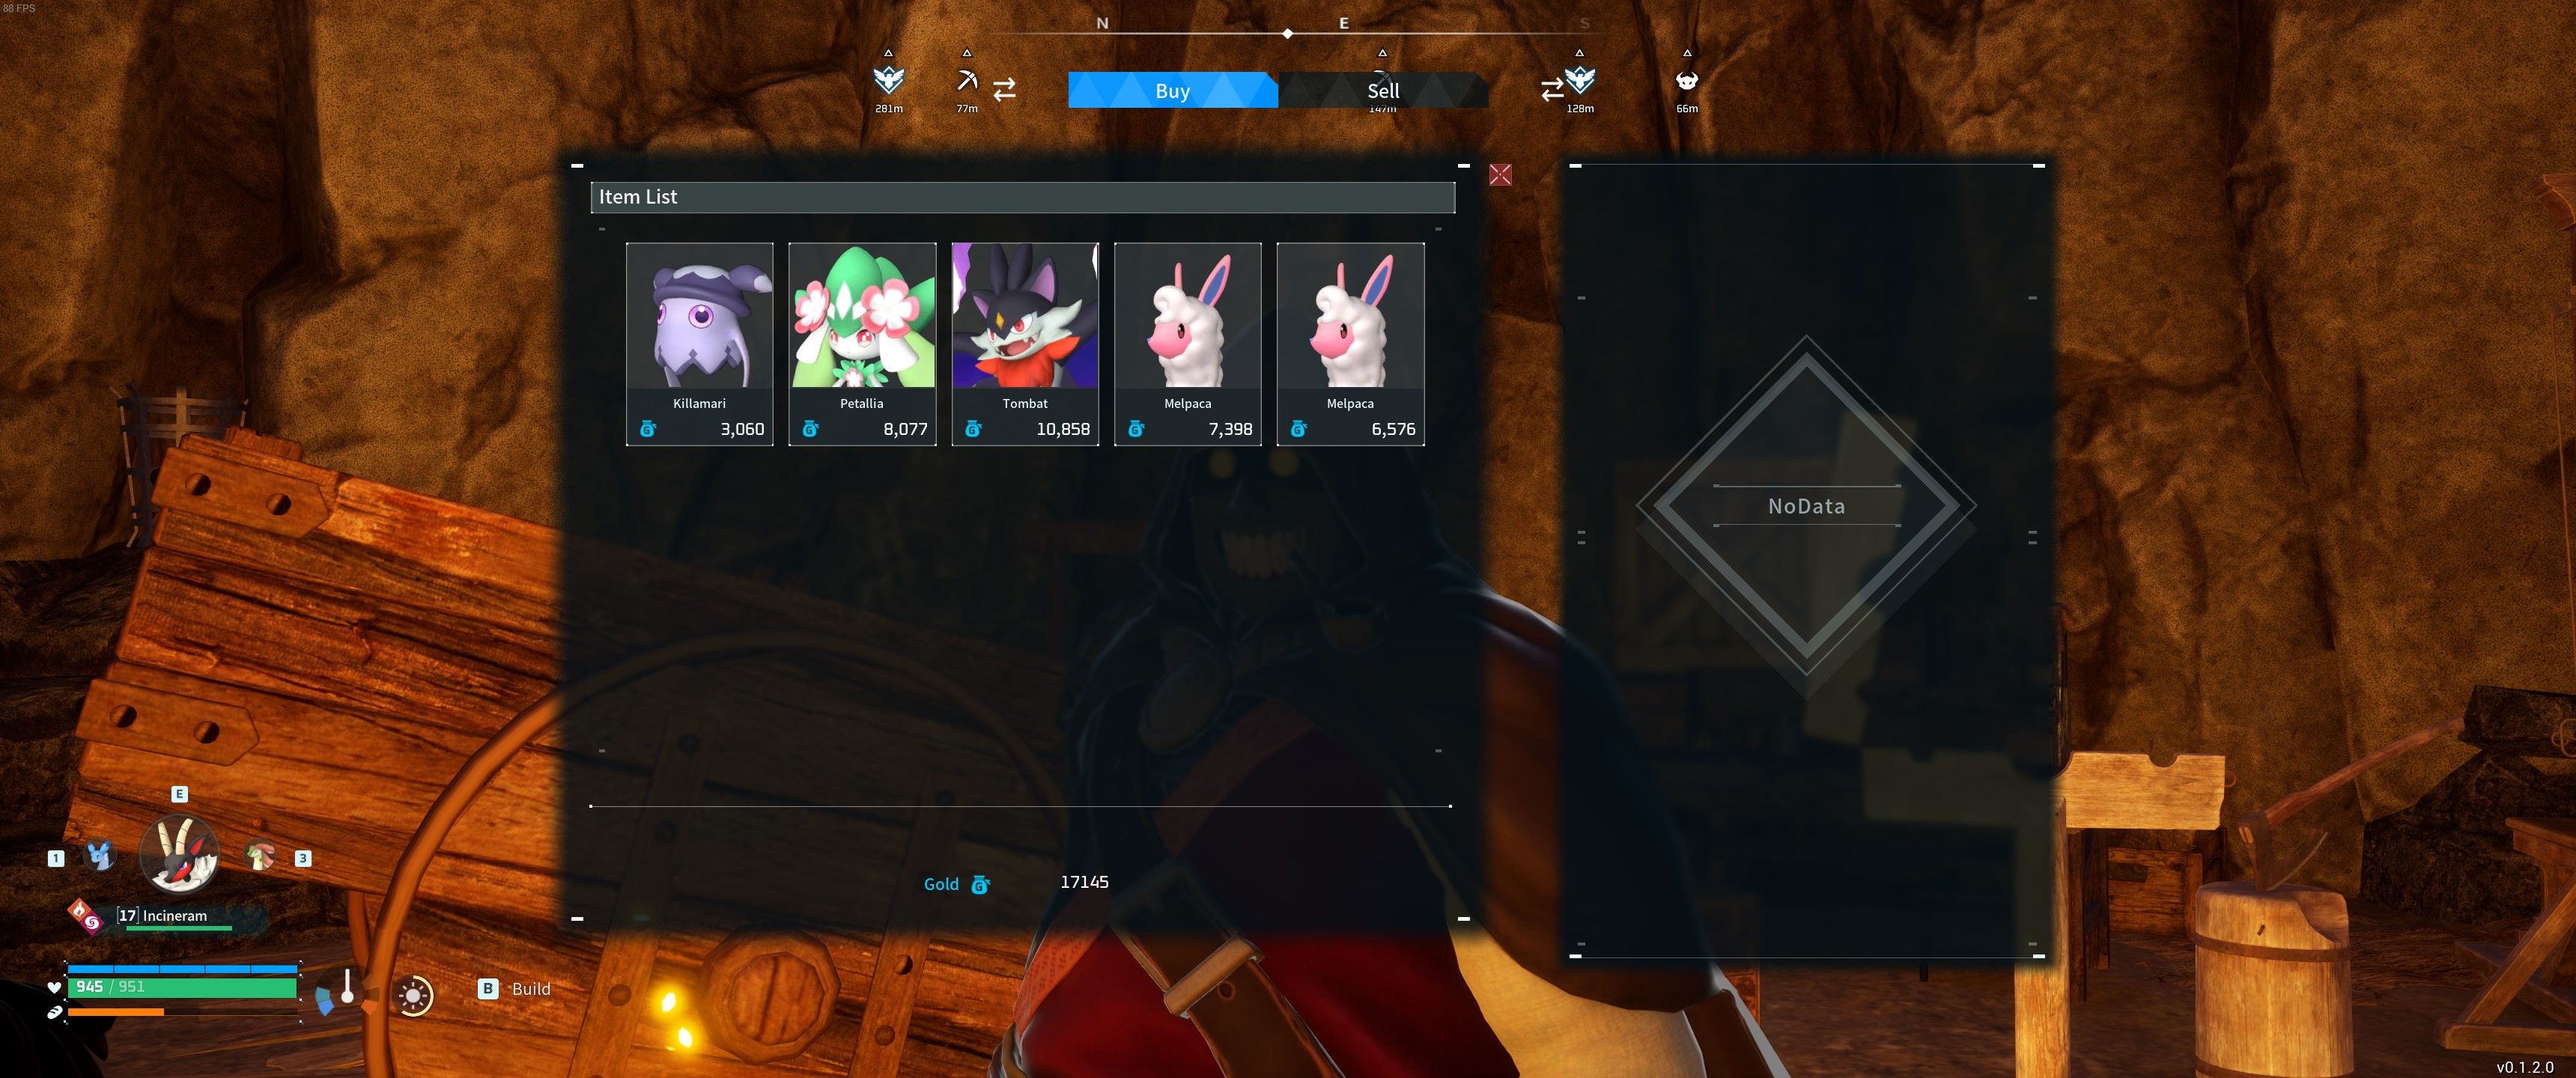 Palworld: An image of the Black Marketeer’s shop inventory screen showing two Melpacas, a Flopie, a Tombat, and a Killamari